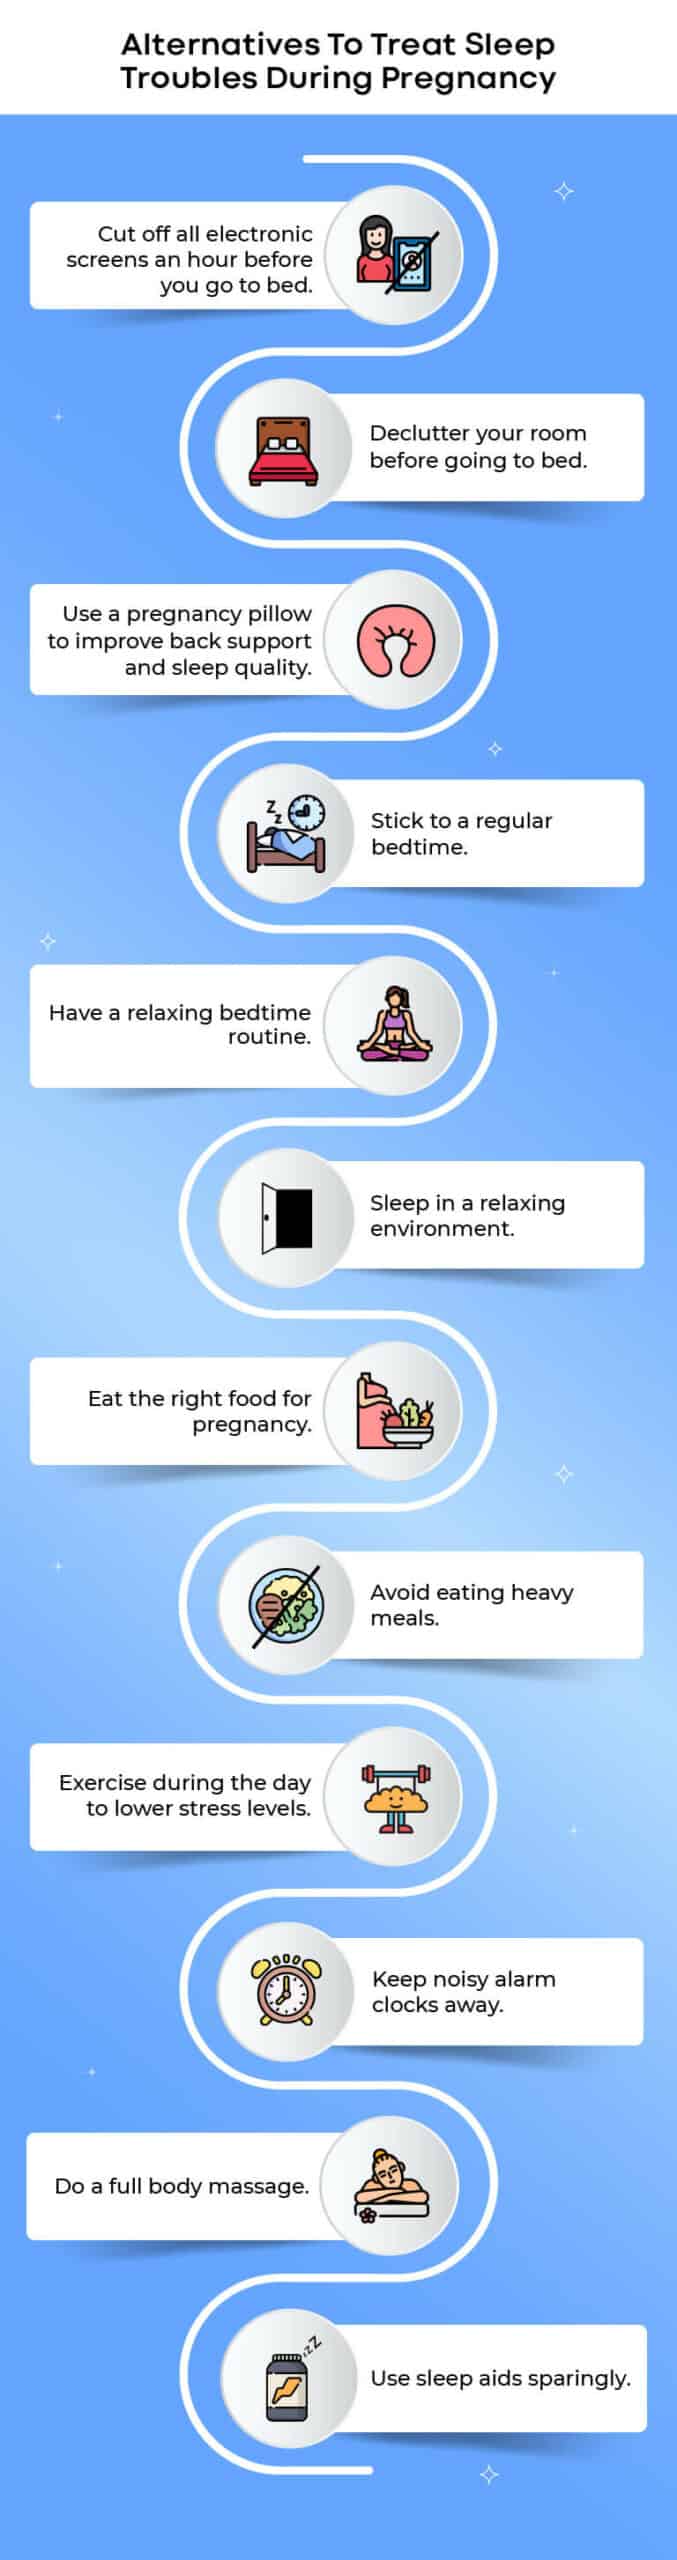 Alternatives To Treat Sleep Troubles During Pregnancy